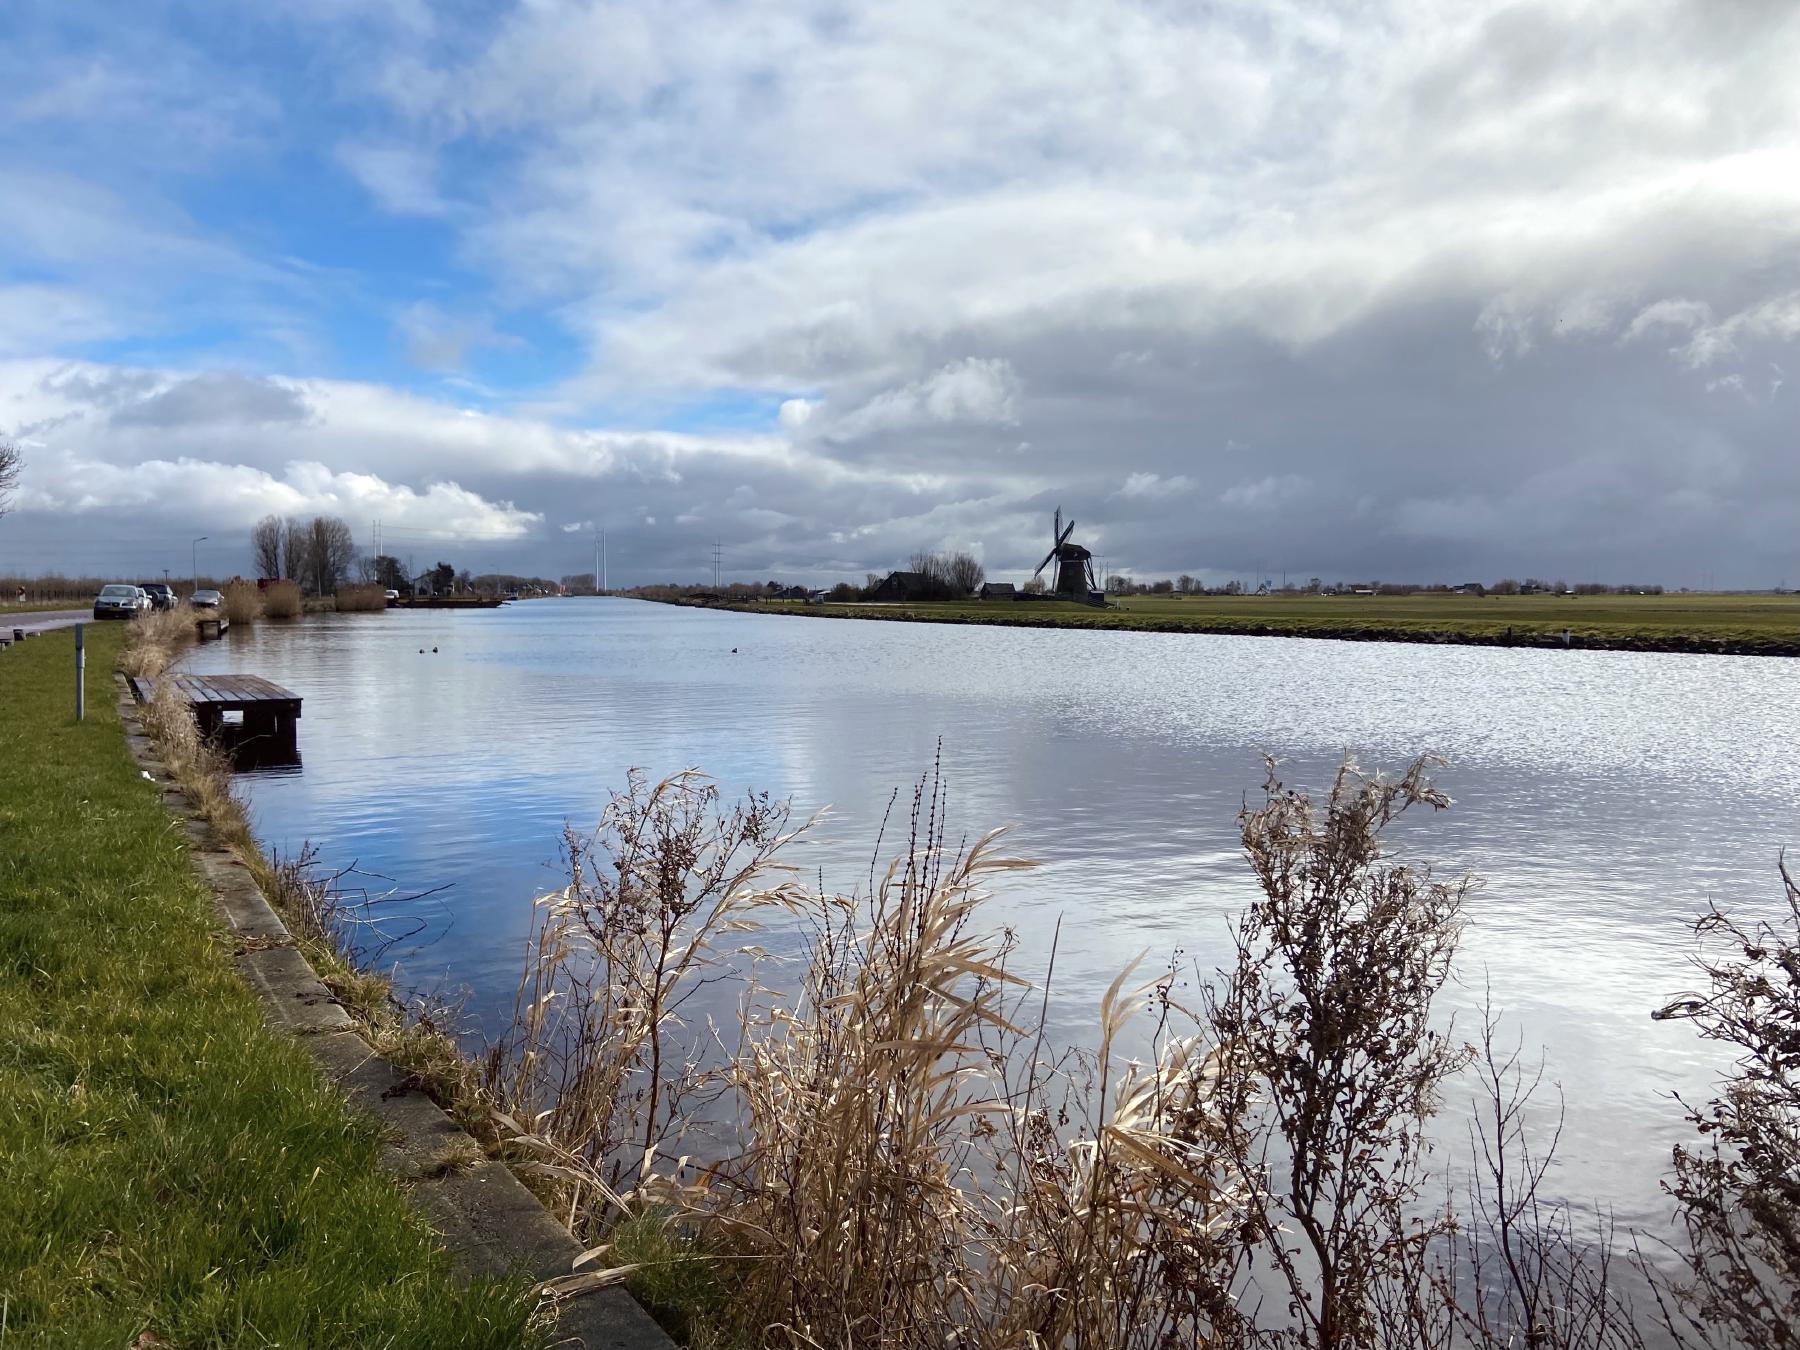 a photo of a canal under a partially sunny partially stormy sky with farmland and a windmill